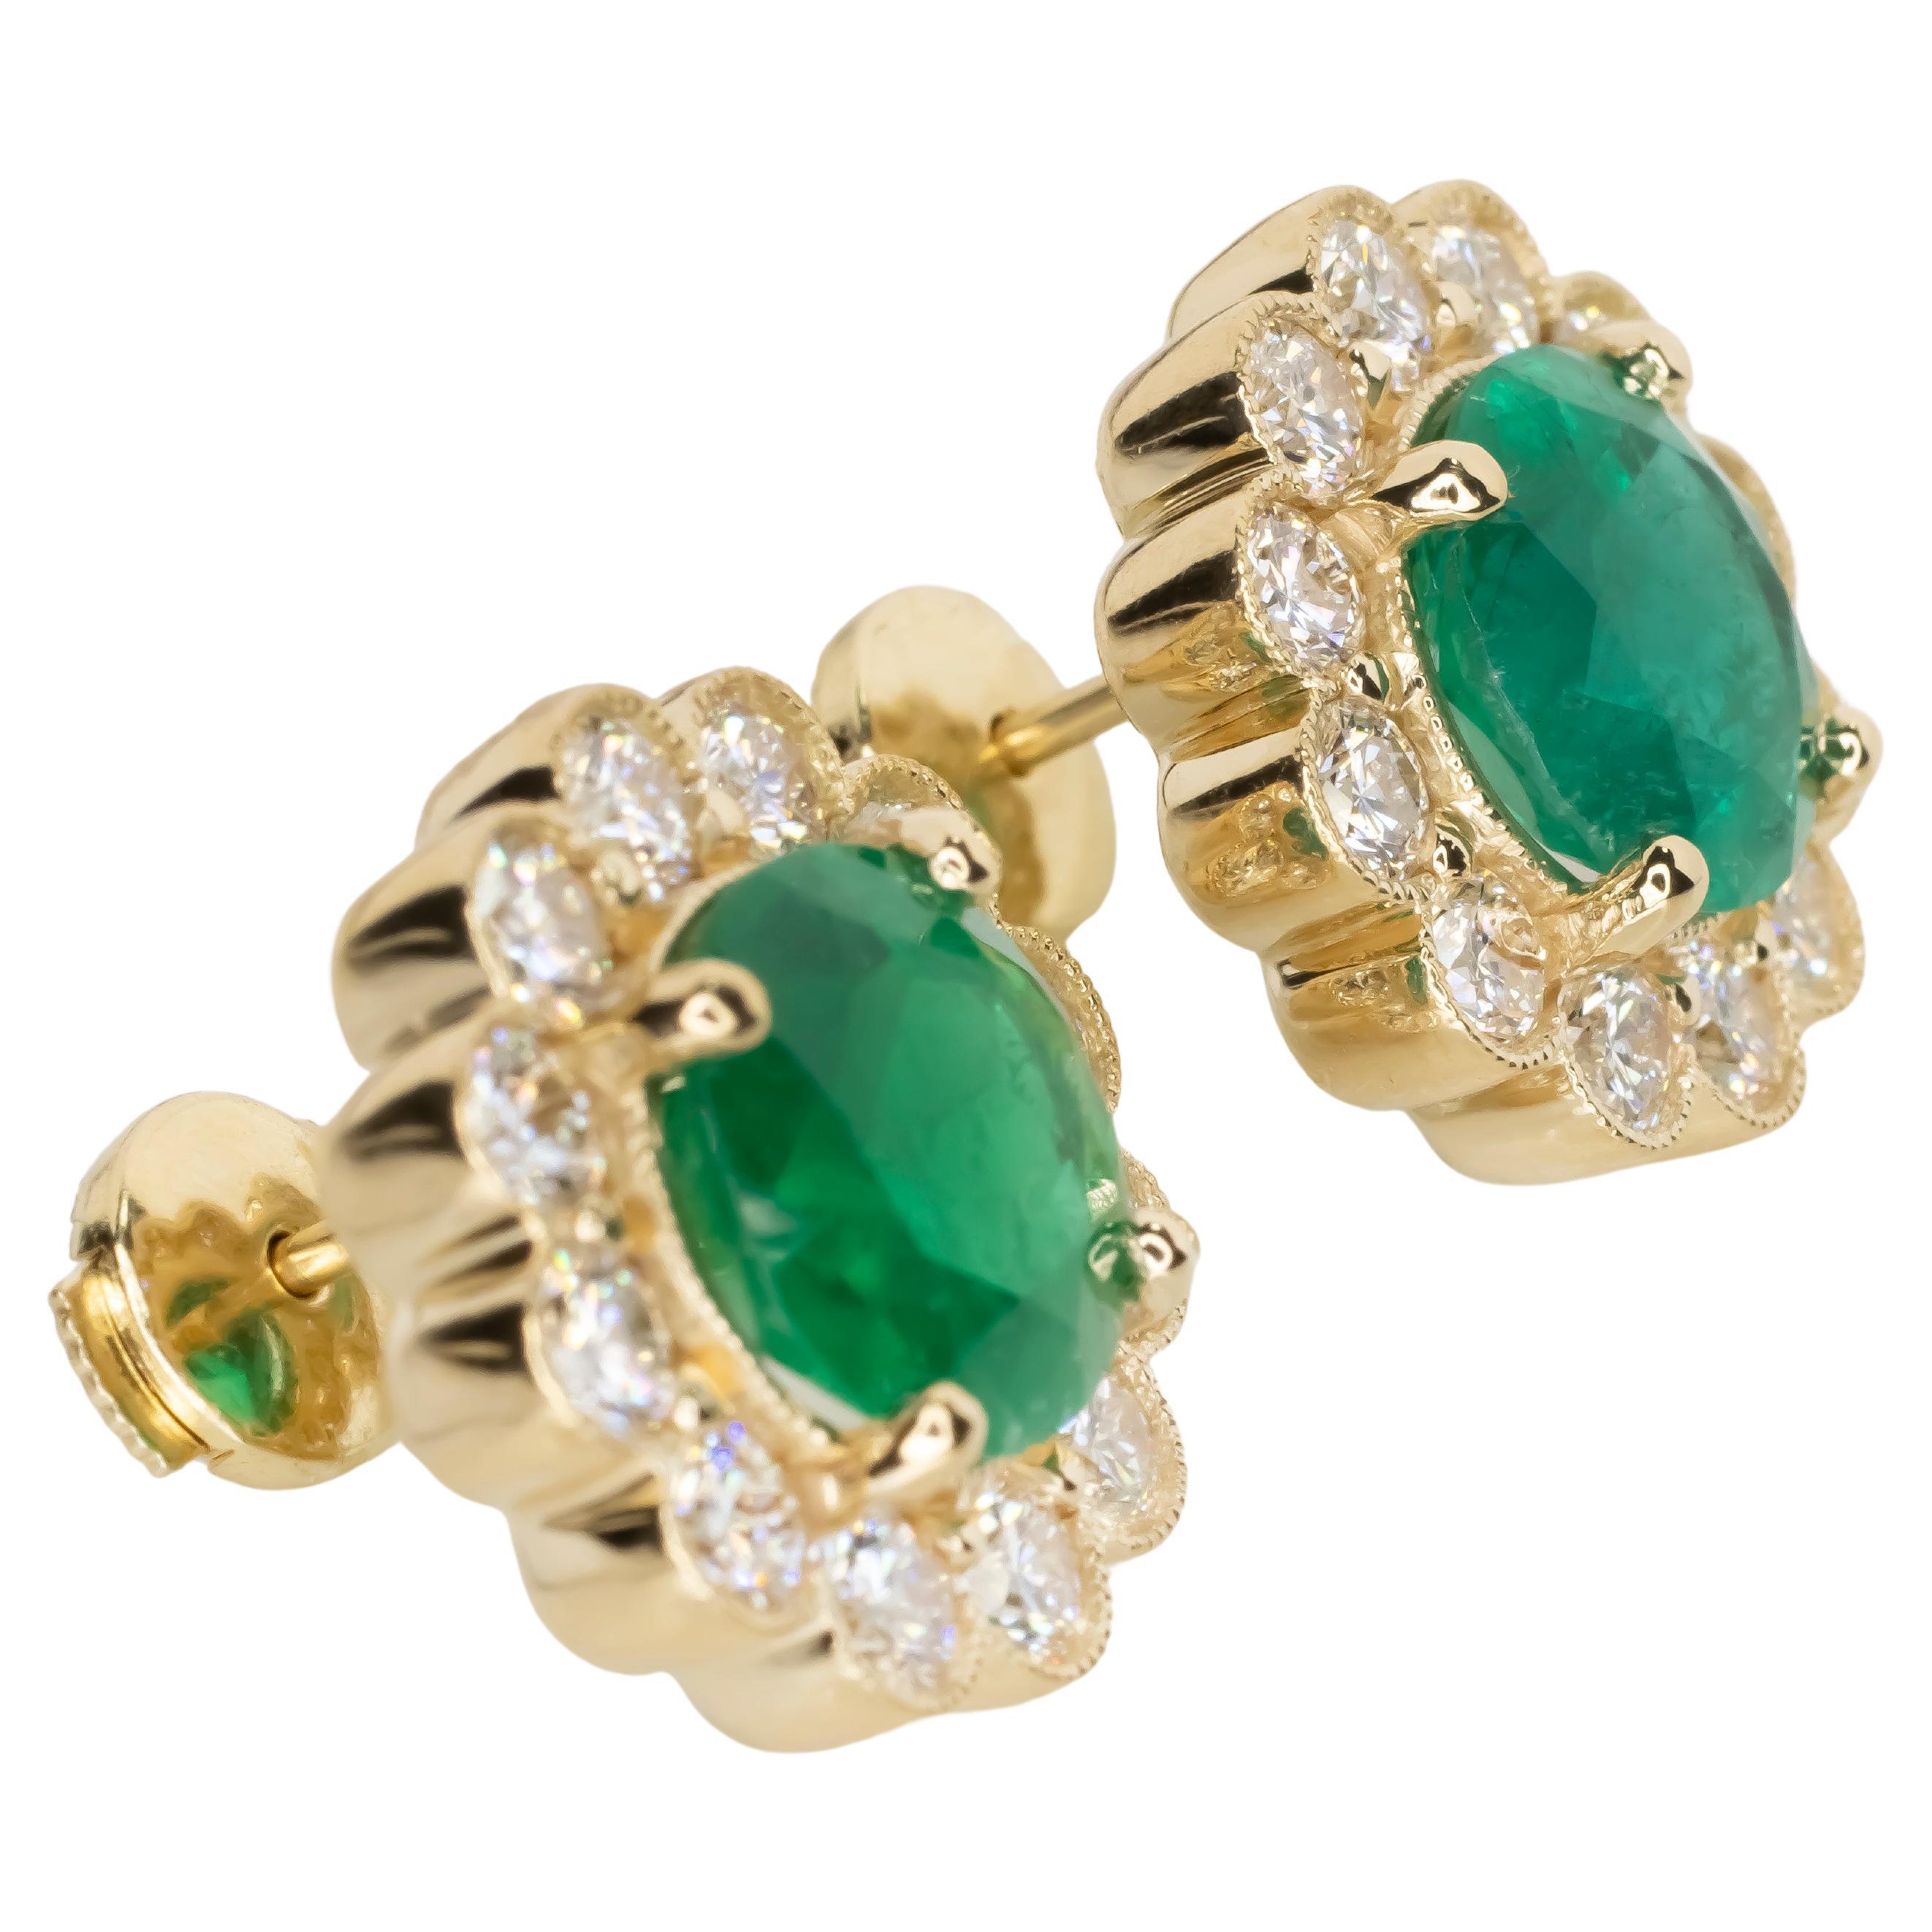 GRS Certified VIVID GREEN Colombian Emerald Diamond Yellow Gold Earrings

set in 18 carats yellow gold

with extremely shiny round brilliant cut diamonds!